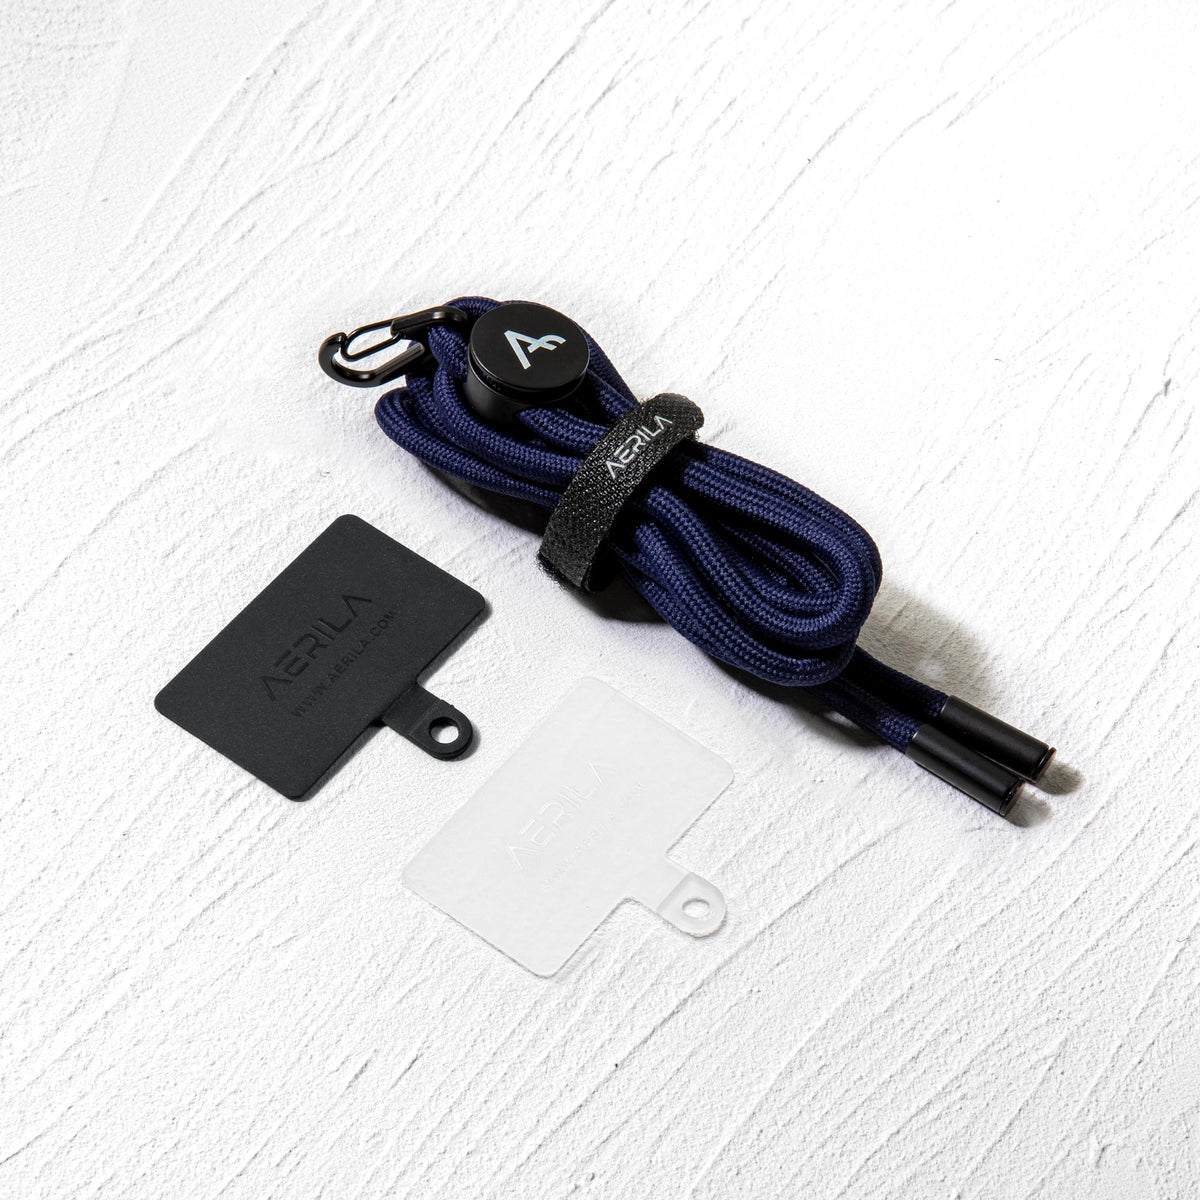 NORE Phone Lanyard set with Connector Patch Card | PHANTOM Collection - AERILA